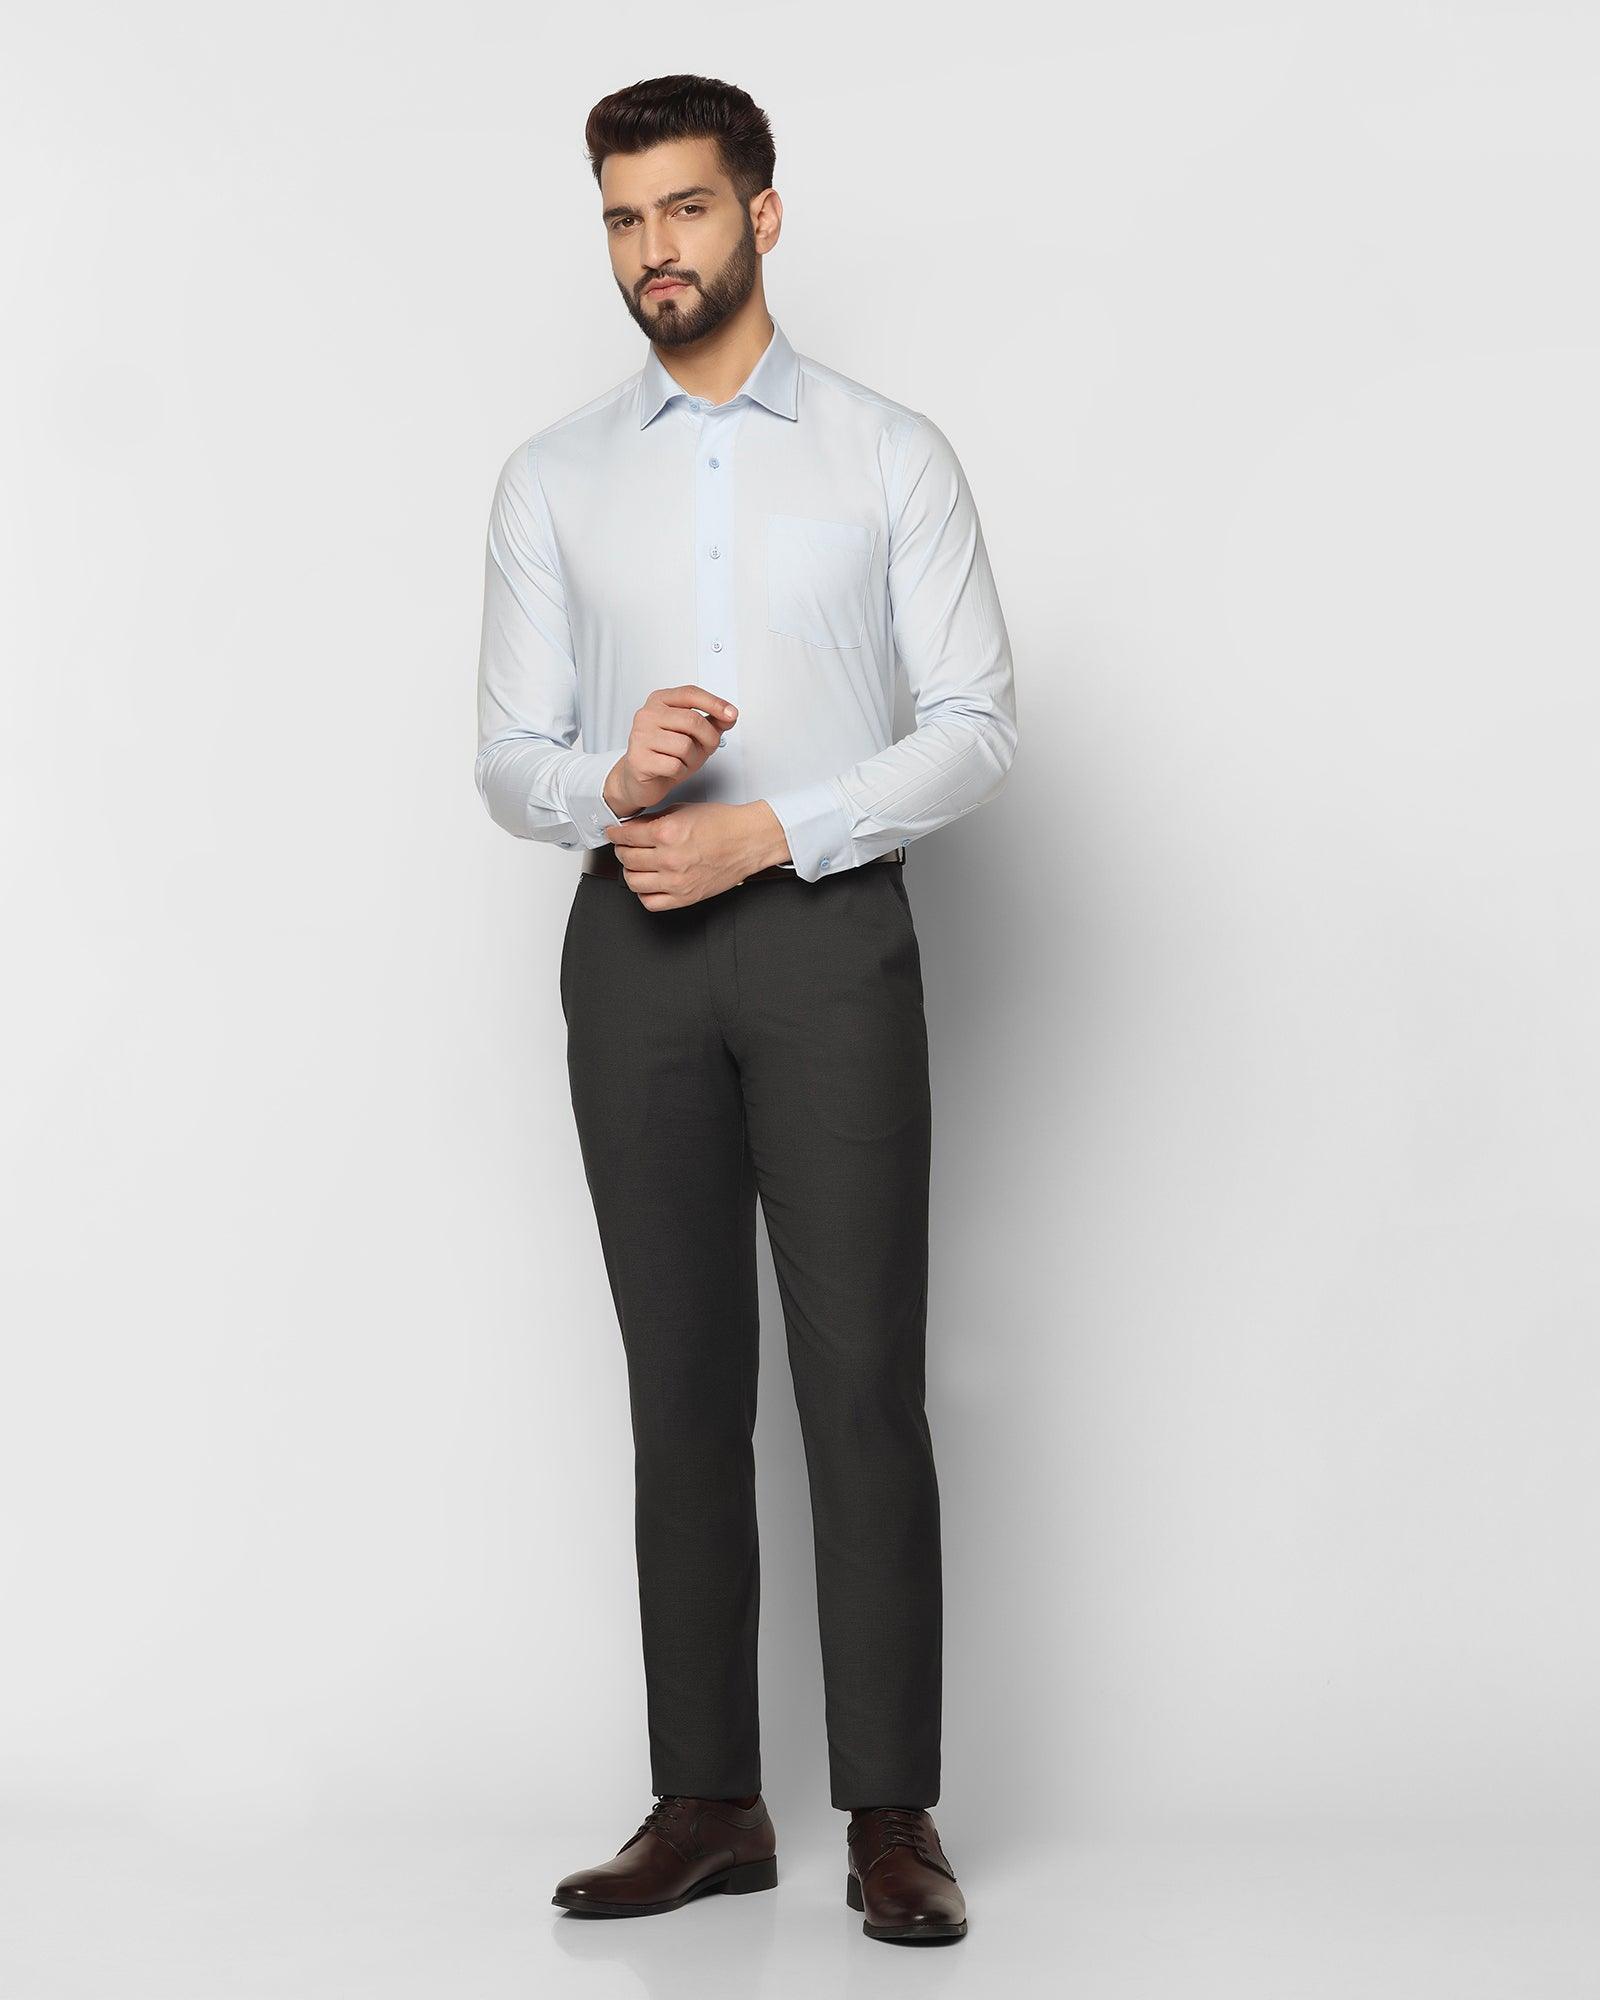 Dress to Impress: Men's Formal Trousers and Shirts for Special Occasions -  Tistabene